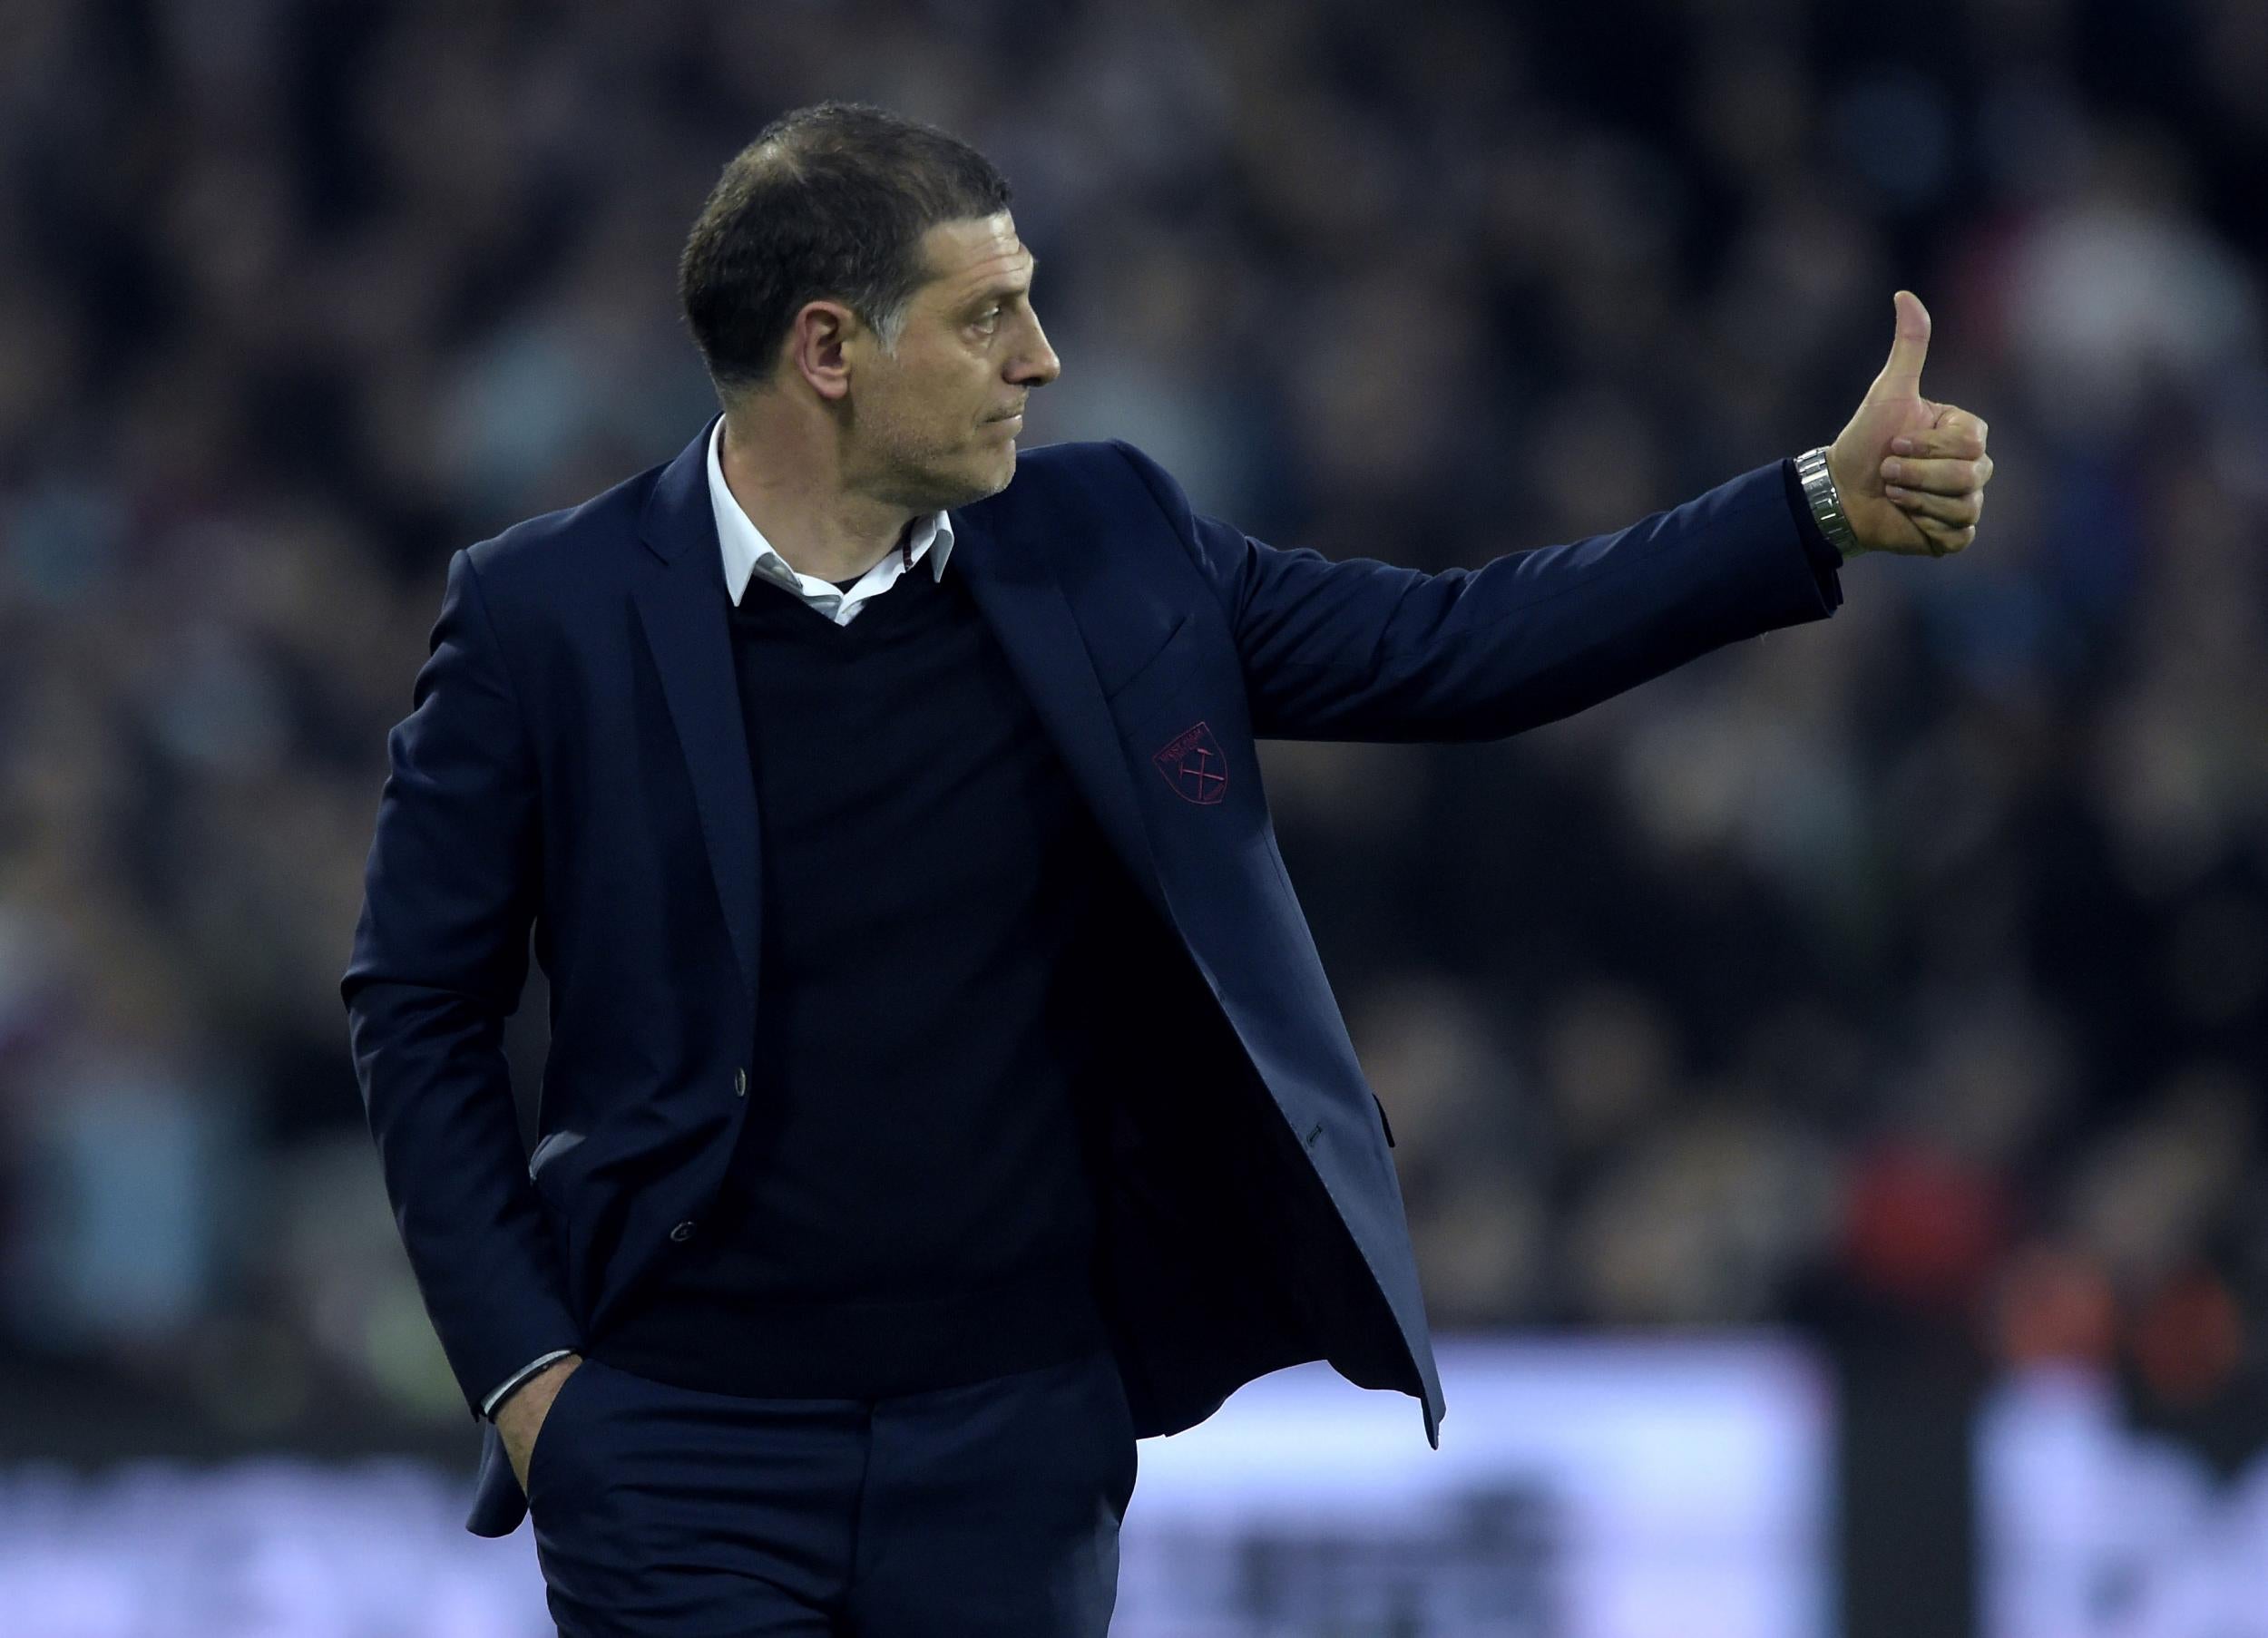 Bilic pulled off some tactical wizardry against Tottenham